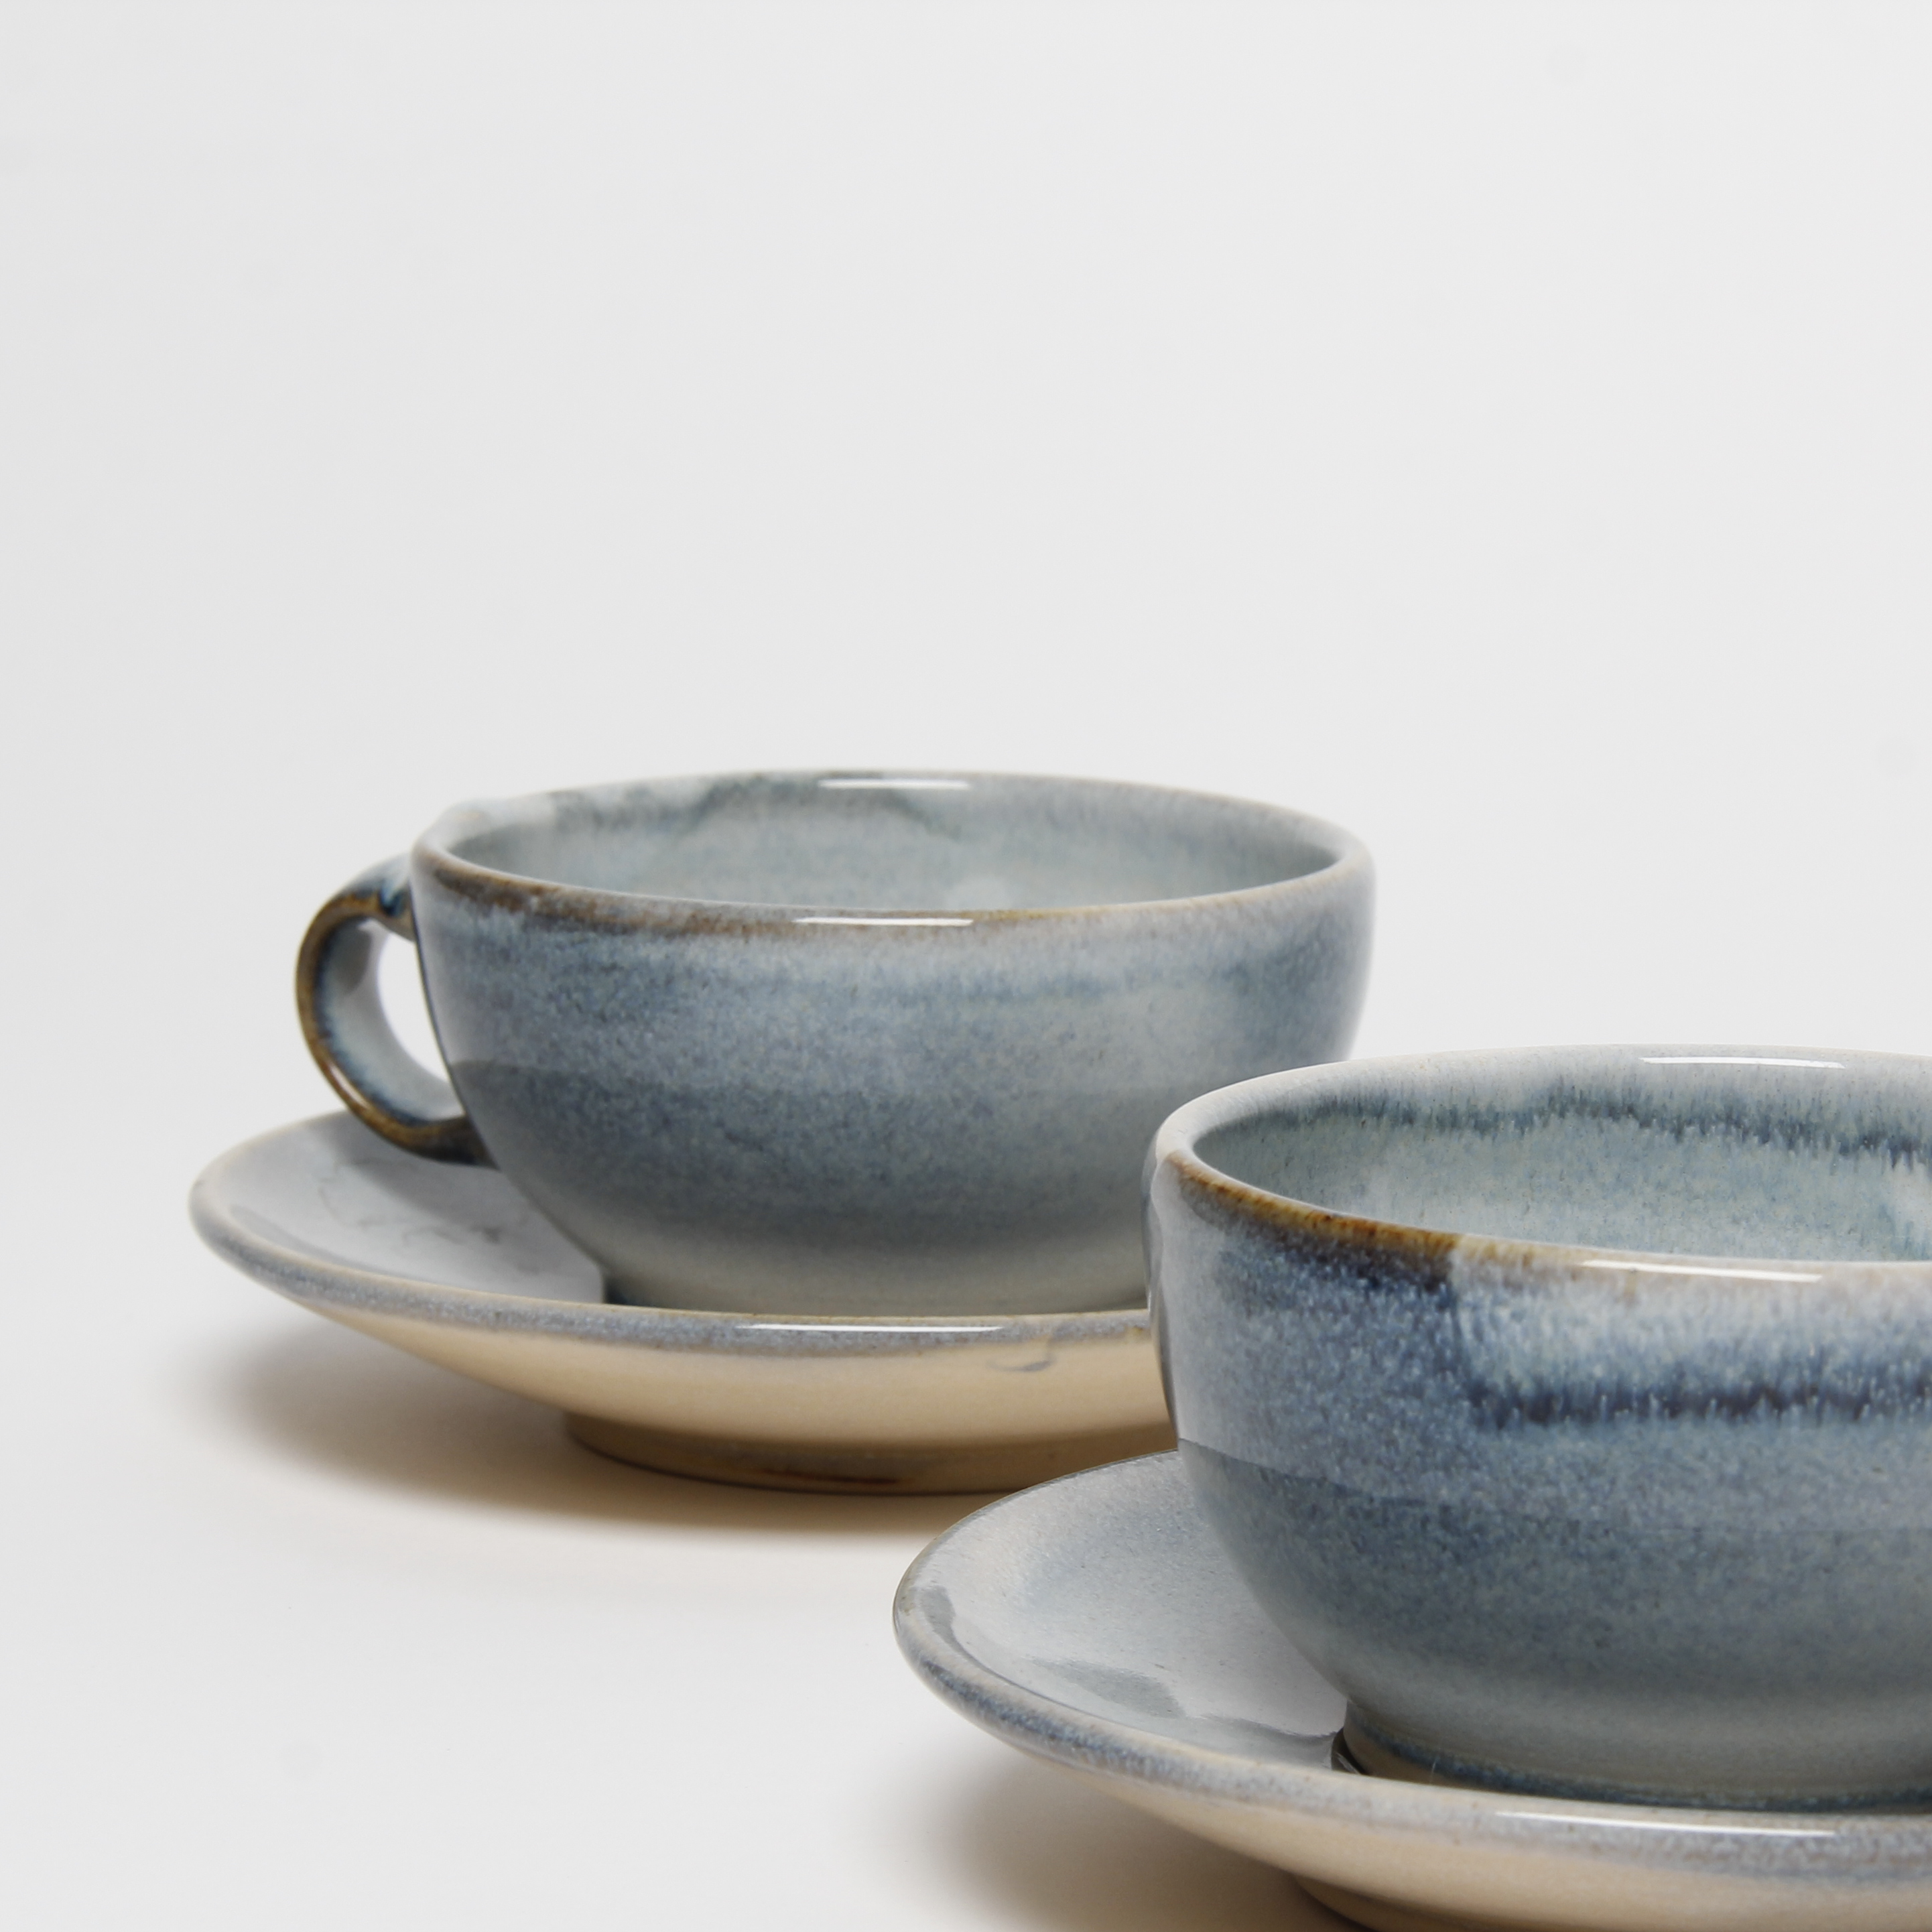 Teresa Dunlop: Cappuccino Cup Product Image 4 of 6